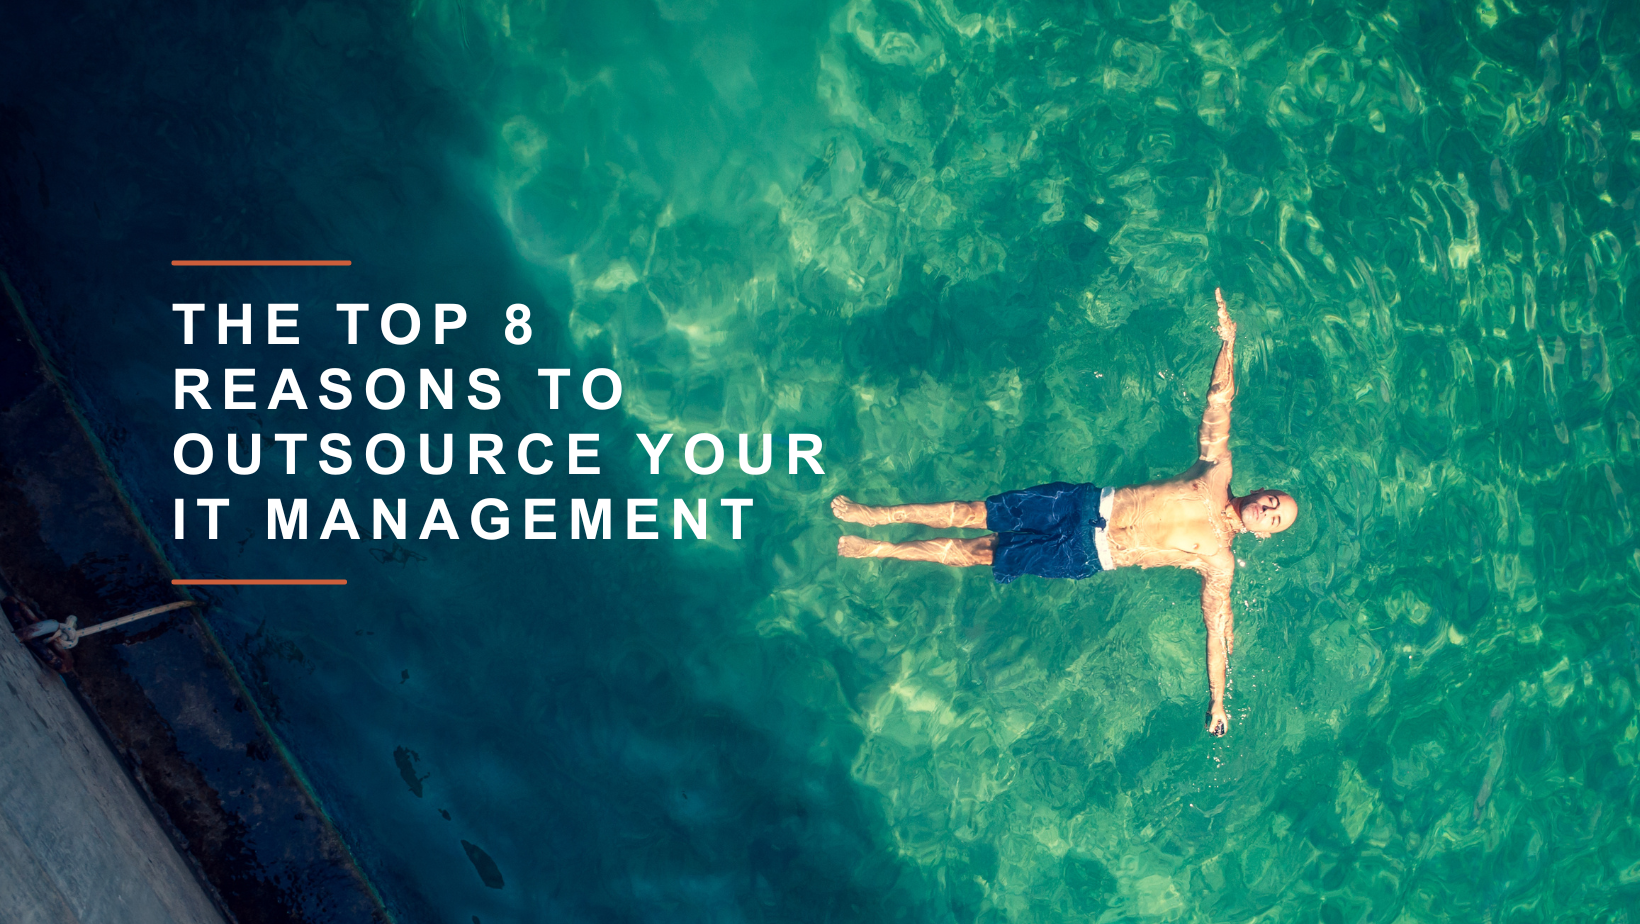 Top 8 reasons to outsource your IT